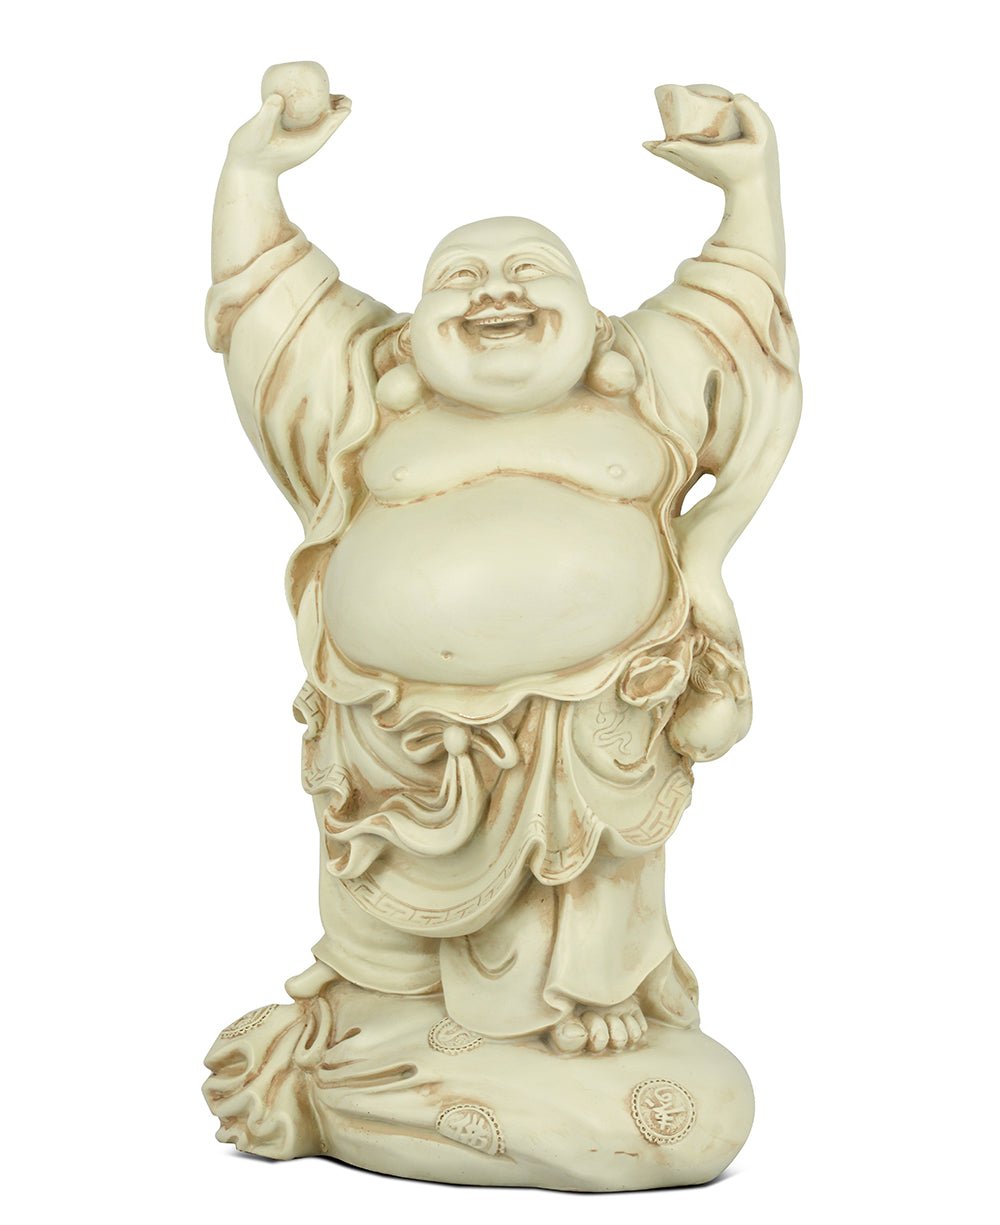 Standing Happy Buddha Statue - Sculptures & Statues